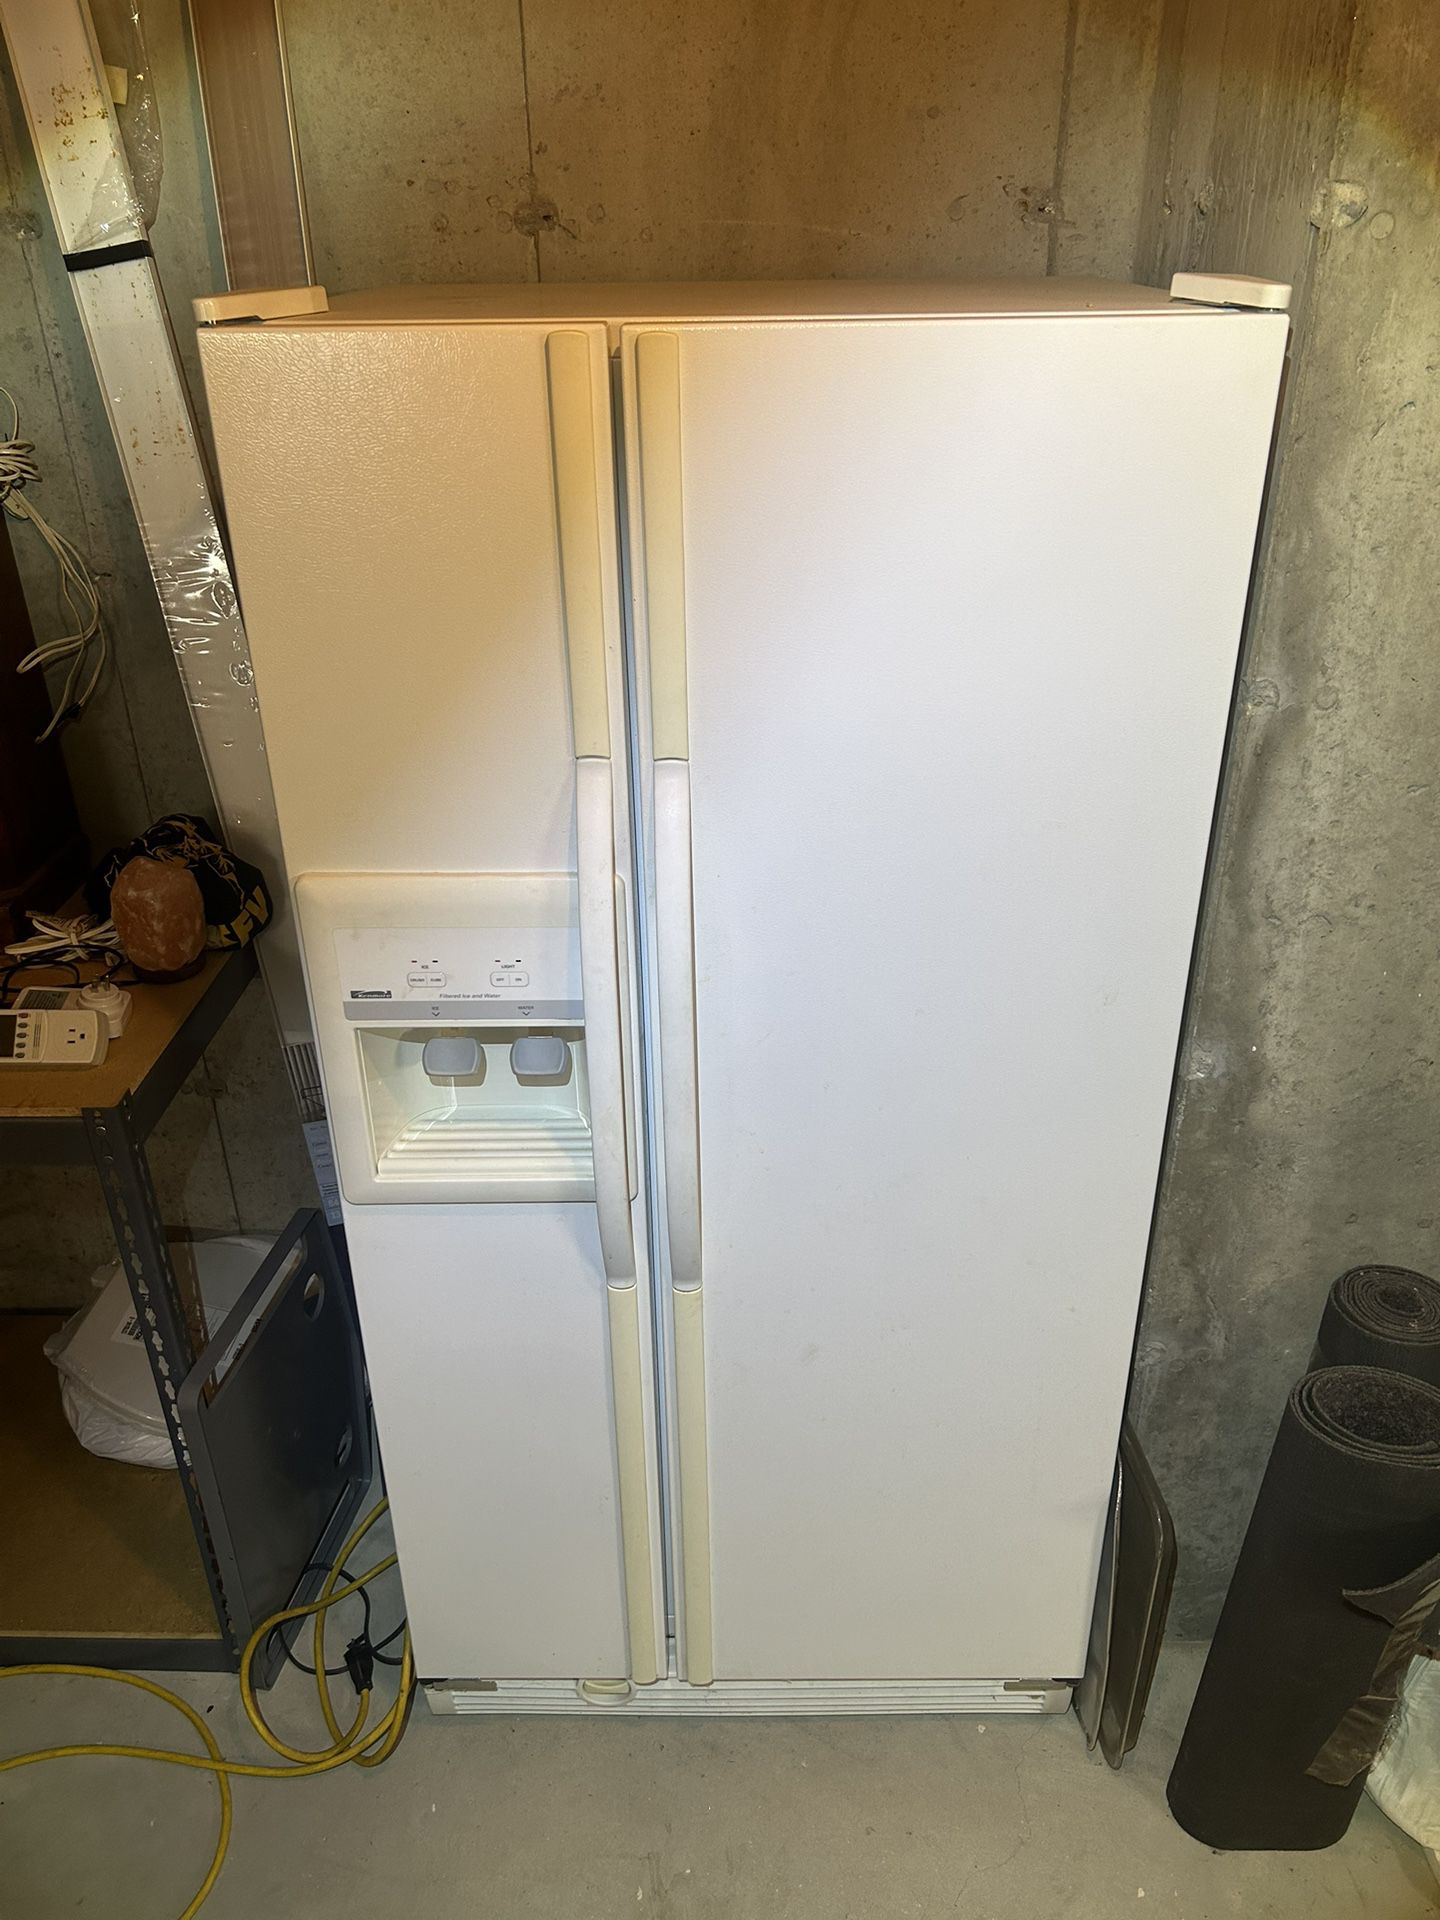 Large Refrigerator Works Perfectly